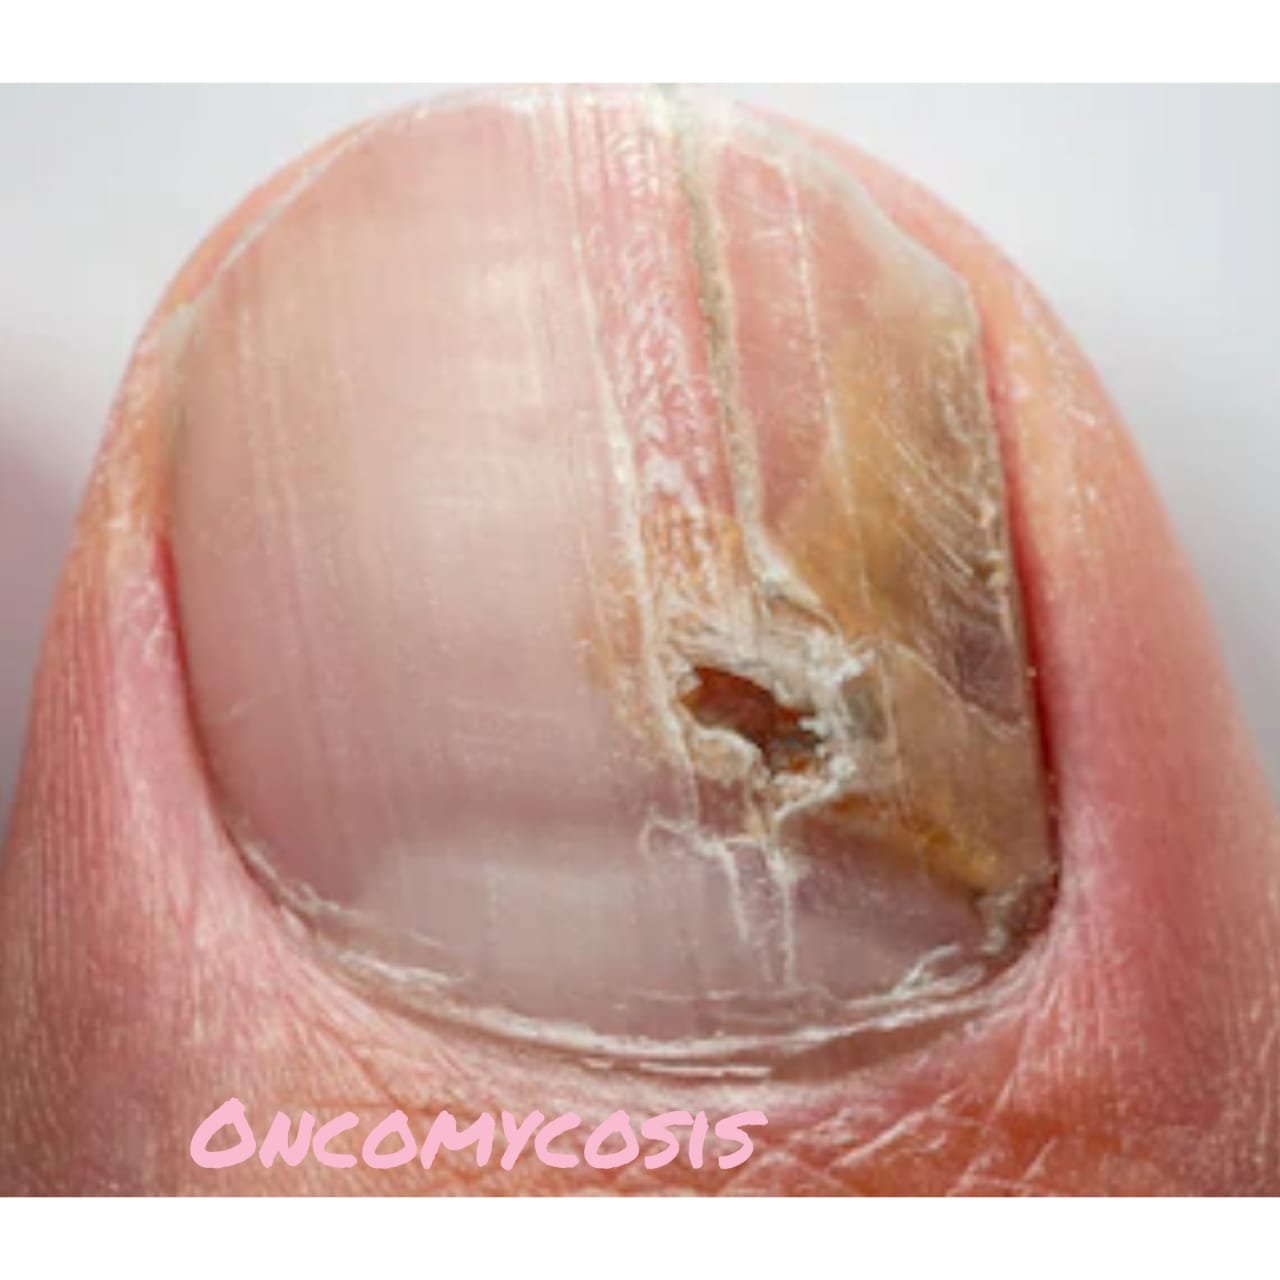 Best medication for nail fungus: Types and benefits